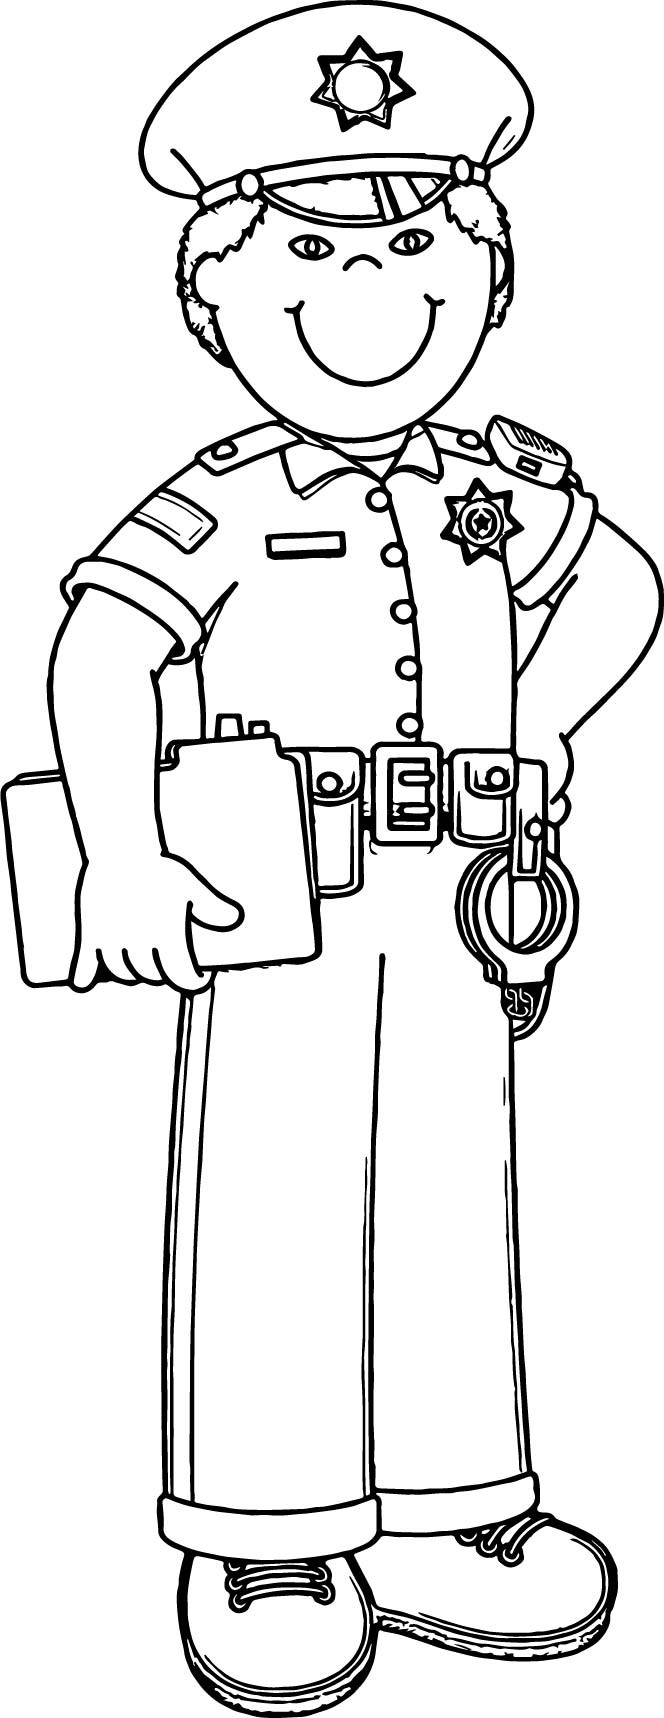 Police Officer Coloring Pages
 It S Here Police Colouring Station Co